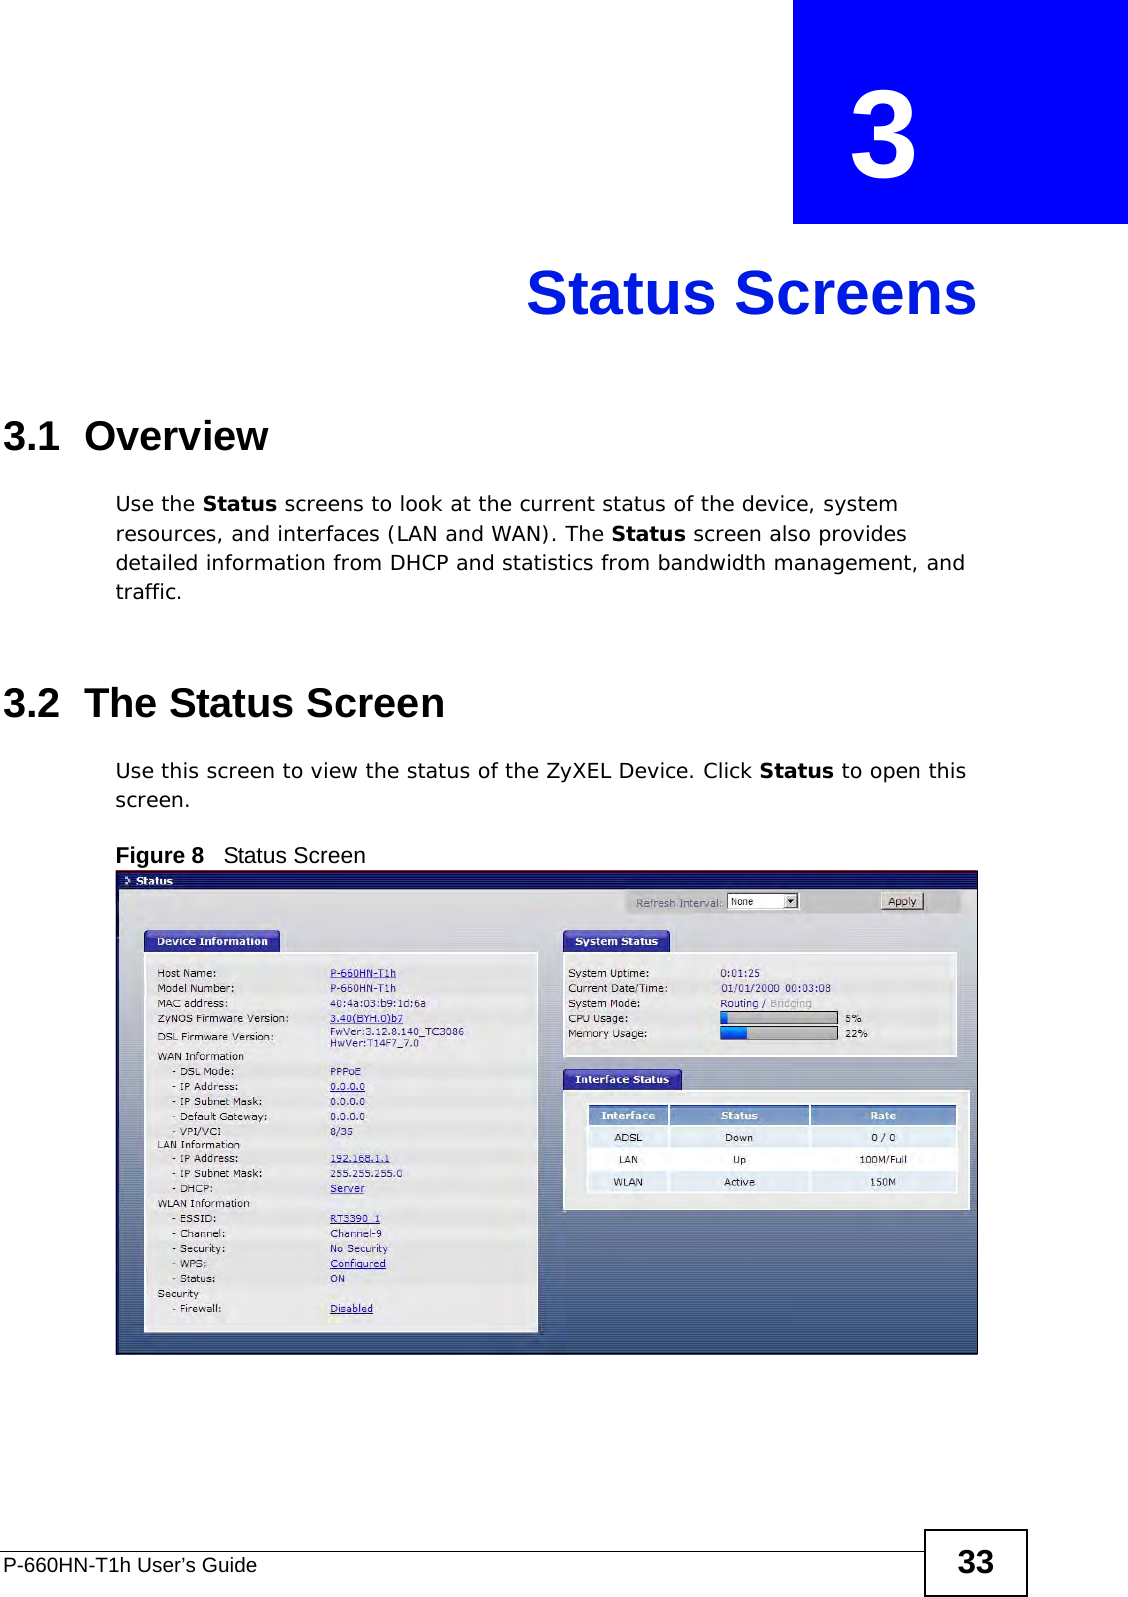 P-660HN-T1h User’s Guide 33CHAPTER  3 Status Screens3.1  OverviewUse the Status screens to look at the current status of the device, system resources, and interfaces (LAN and WAN). The Status screen also provides detailed information from DHCP and statistics from bandwidth management, and traffic.3.2  The Status Screen Use this screen to view the status of the ZyXEL Device. Click Status to open this screen.Figure 8   Status Screen